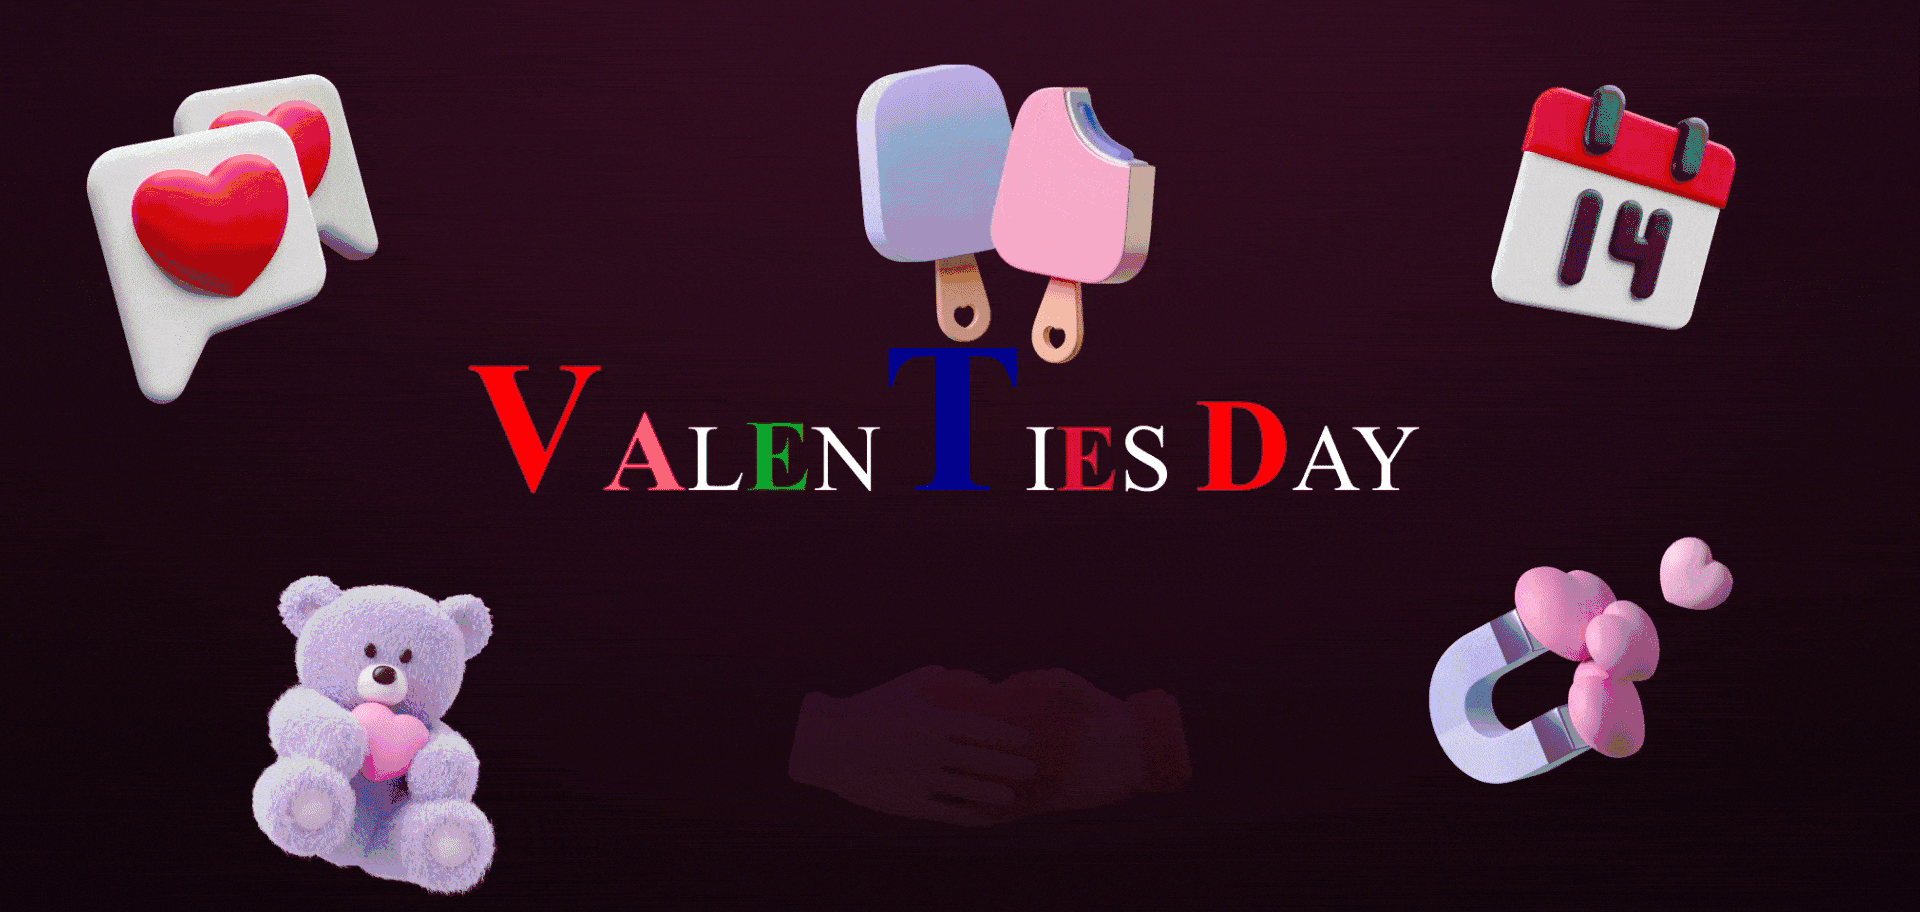 Use Valentines Widget to your project 3d animation branding design graphic design logo motion graphics ui